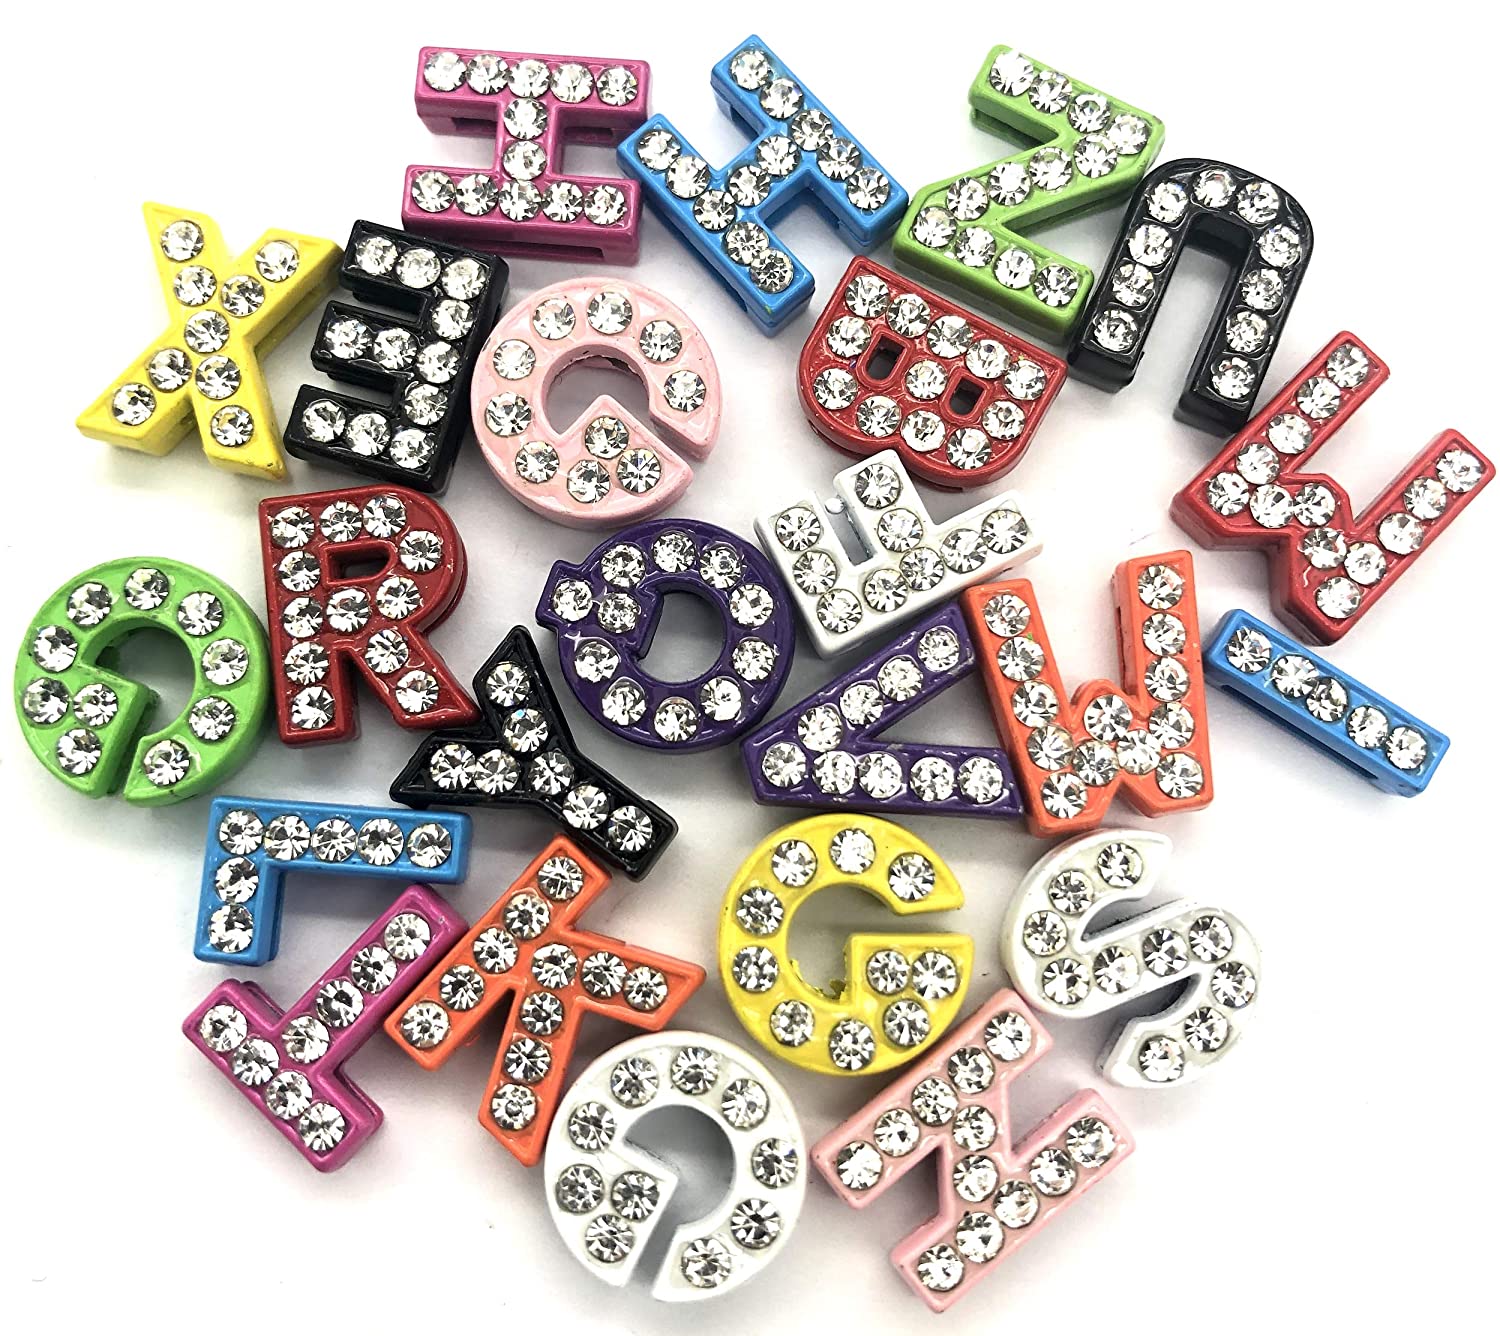 A-Z Rhinestones Letters, Multi-Color 8 mm Rhinestone Alphabet Letters Charms